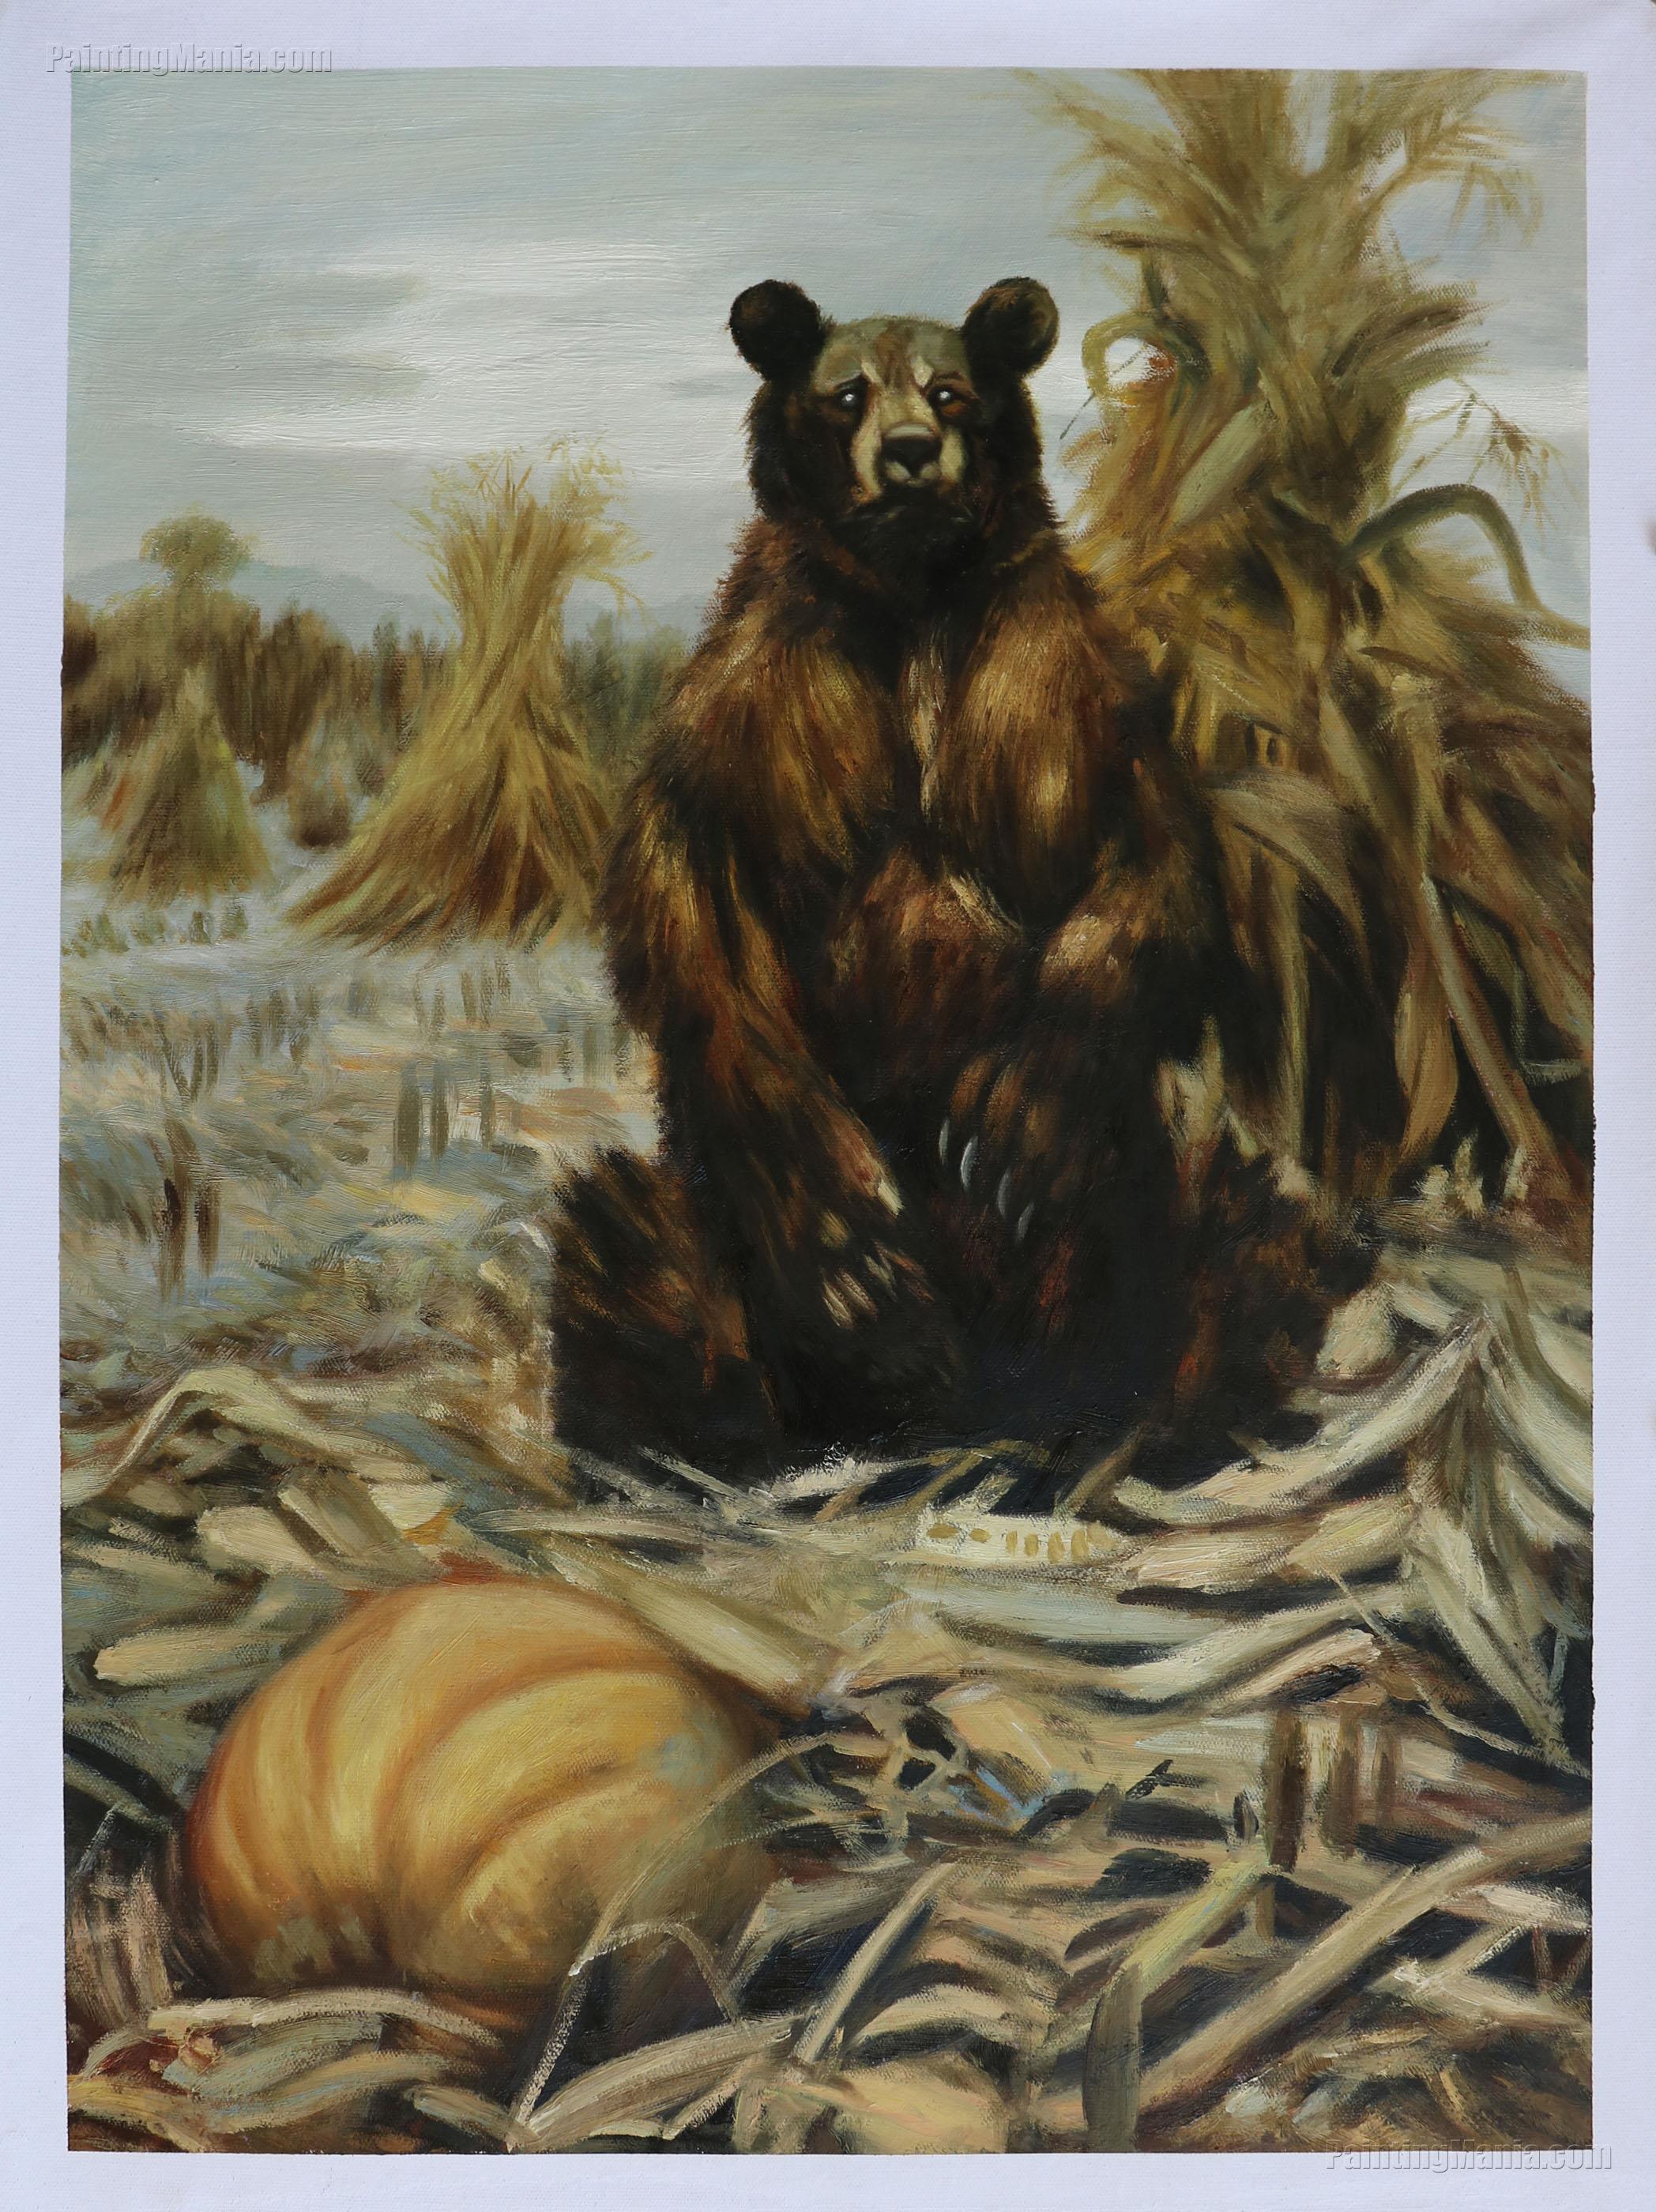 The Nature of Bears